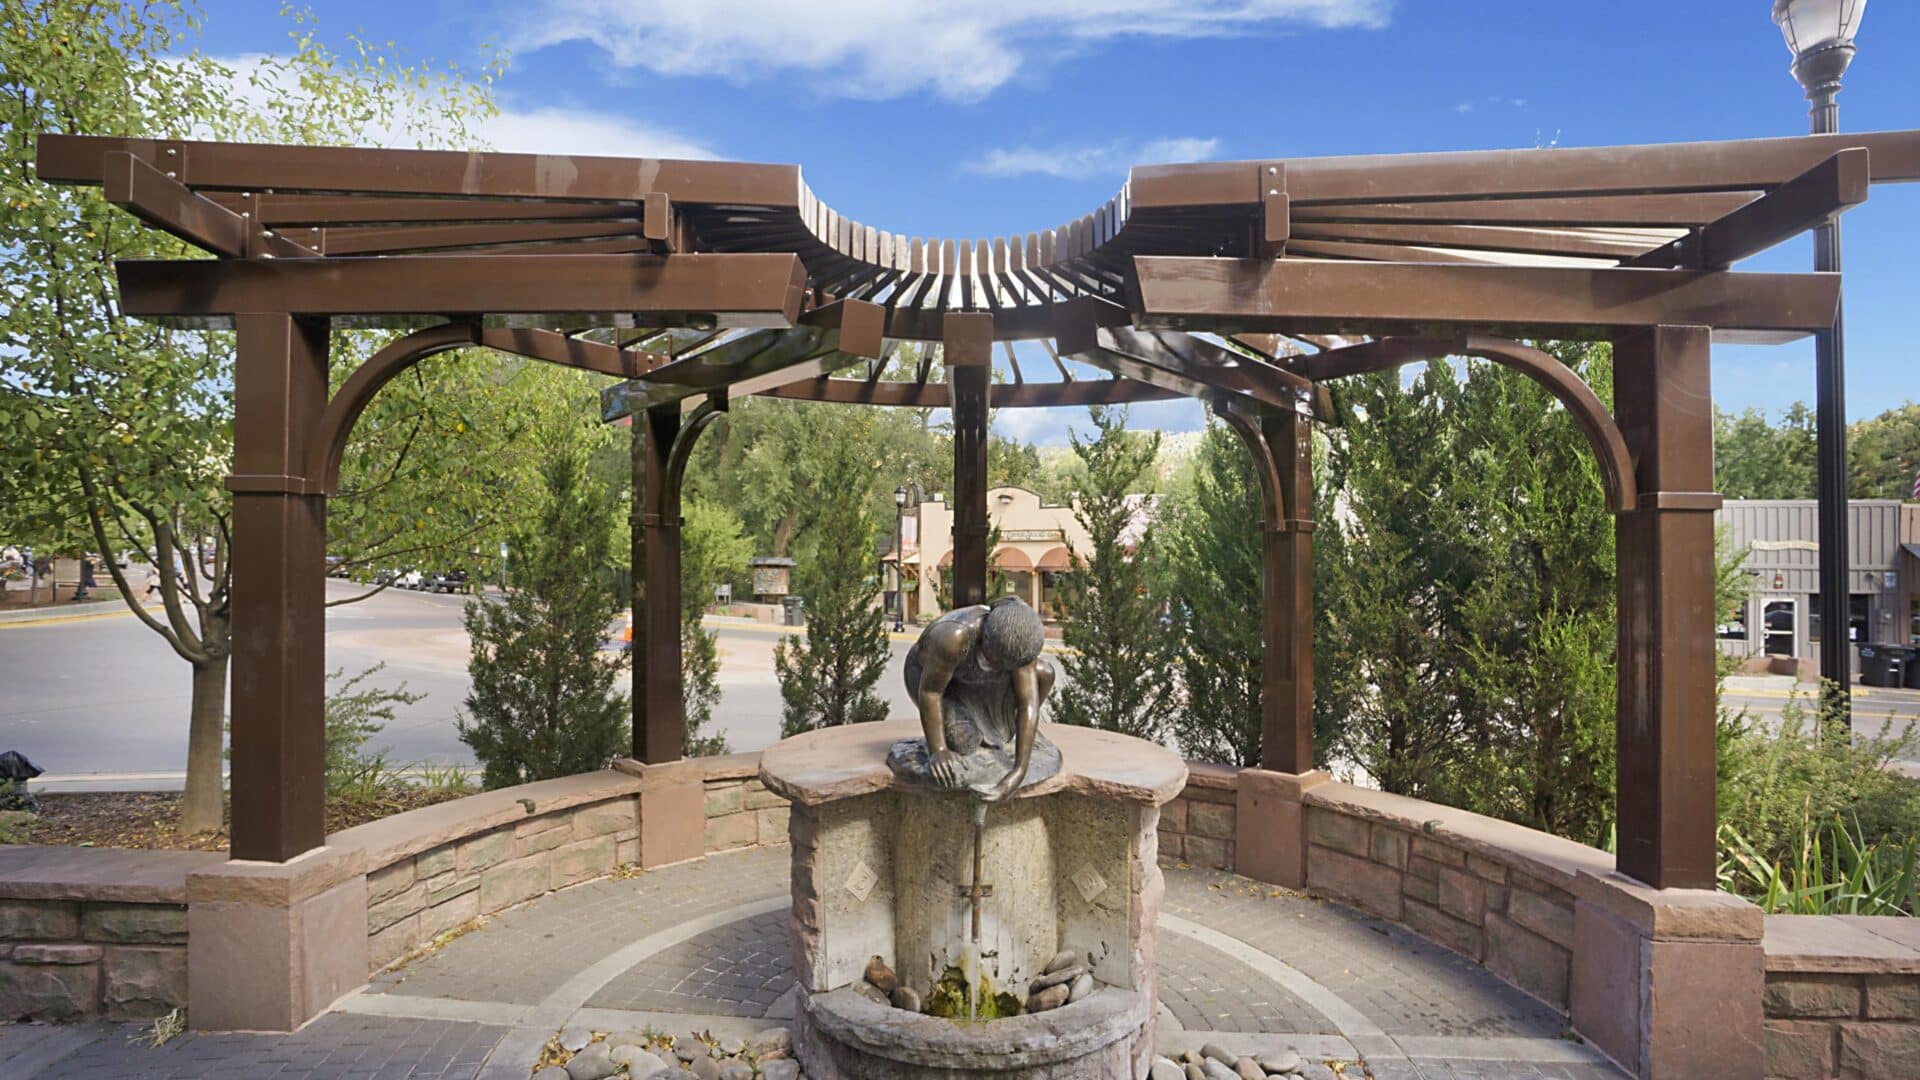 Mineral spring with bronze statue above it catching water in a half circle of brick and wood with blue skies and clouds, and trees and bushes around